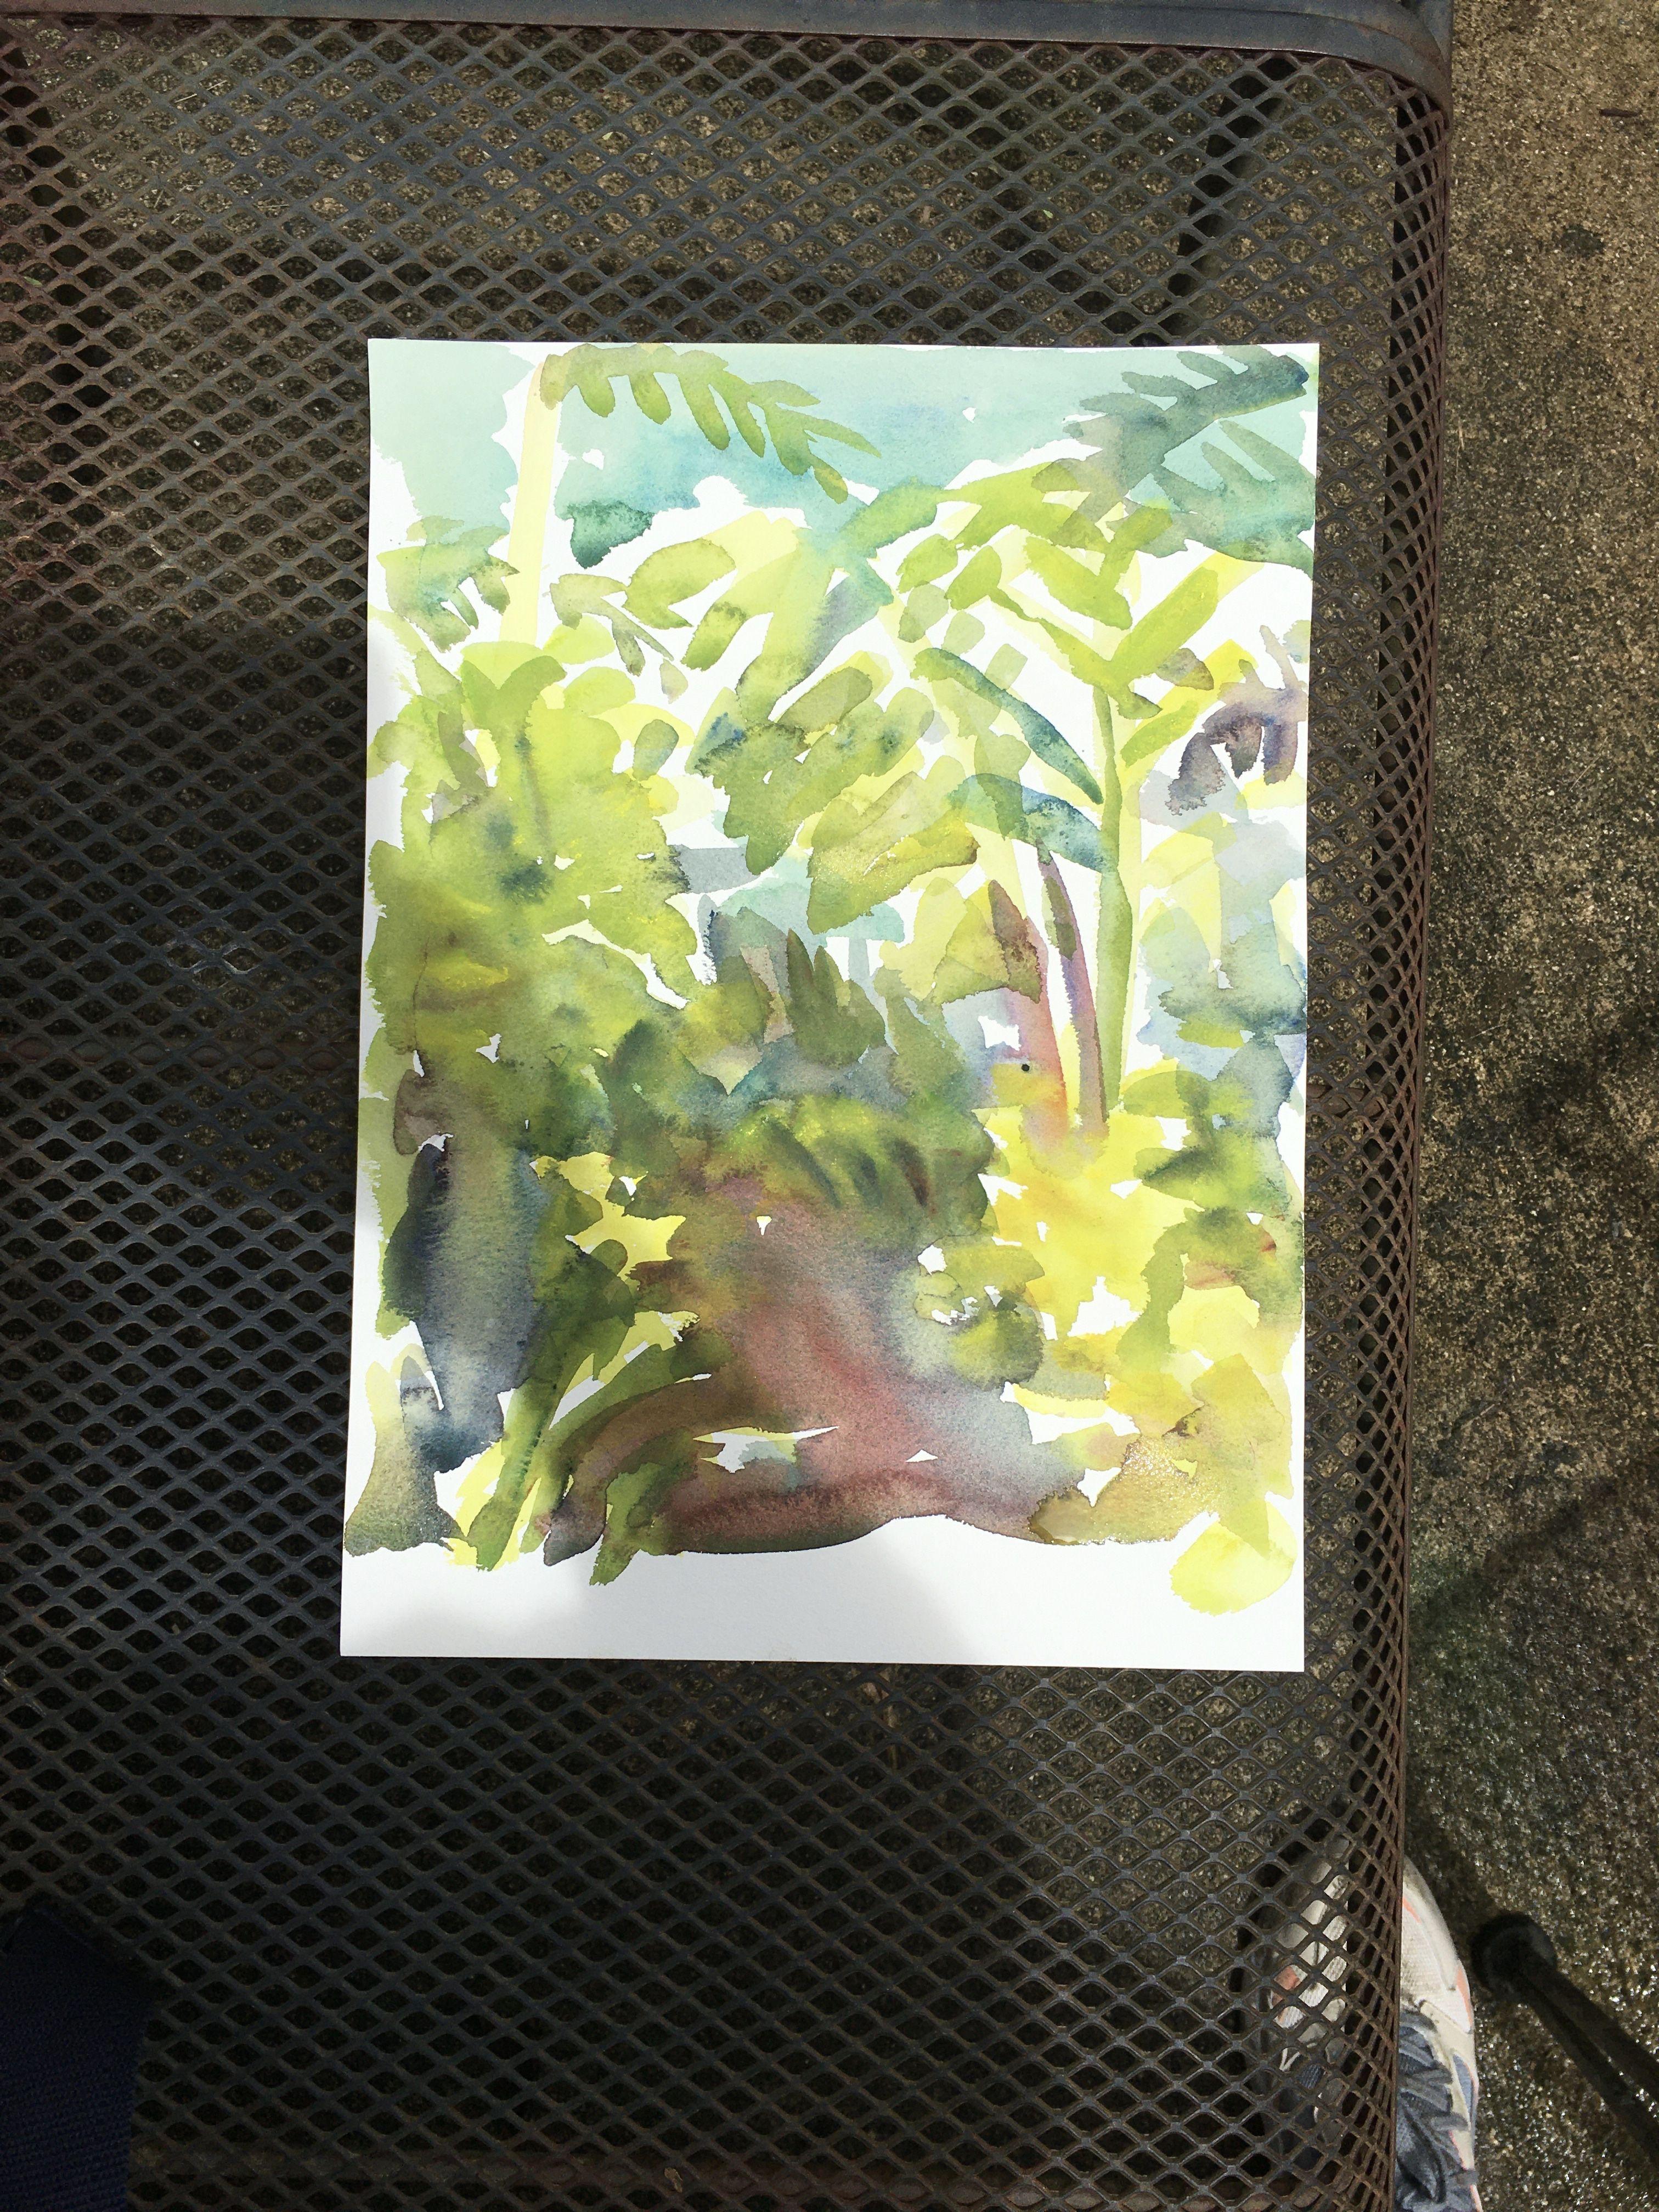 Plein air watercolor painted while under curfew in Caguas, Puerto Rico in March 2020. :: Painting :: Impressionist :: This piece comes with an official certificate of authenticity signed by the artist :: Ready to Hang: No :: Signed: Yes :: Signature